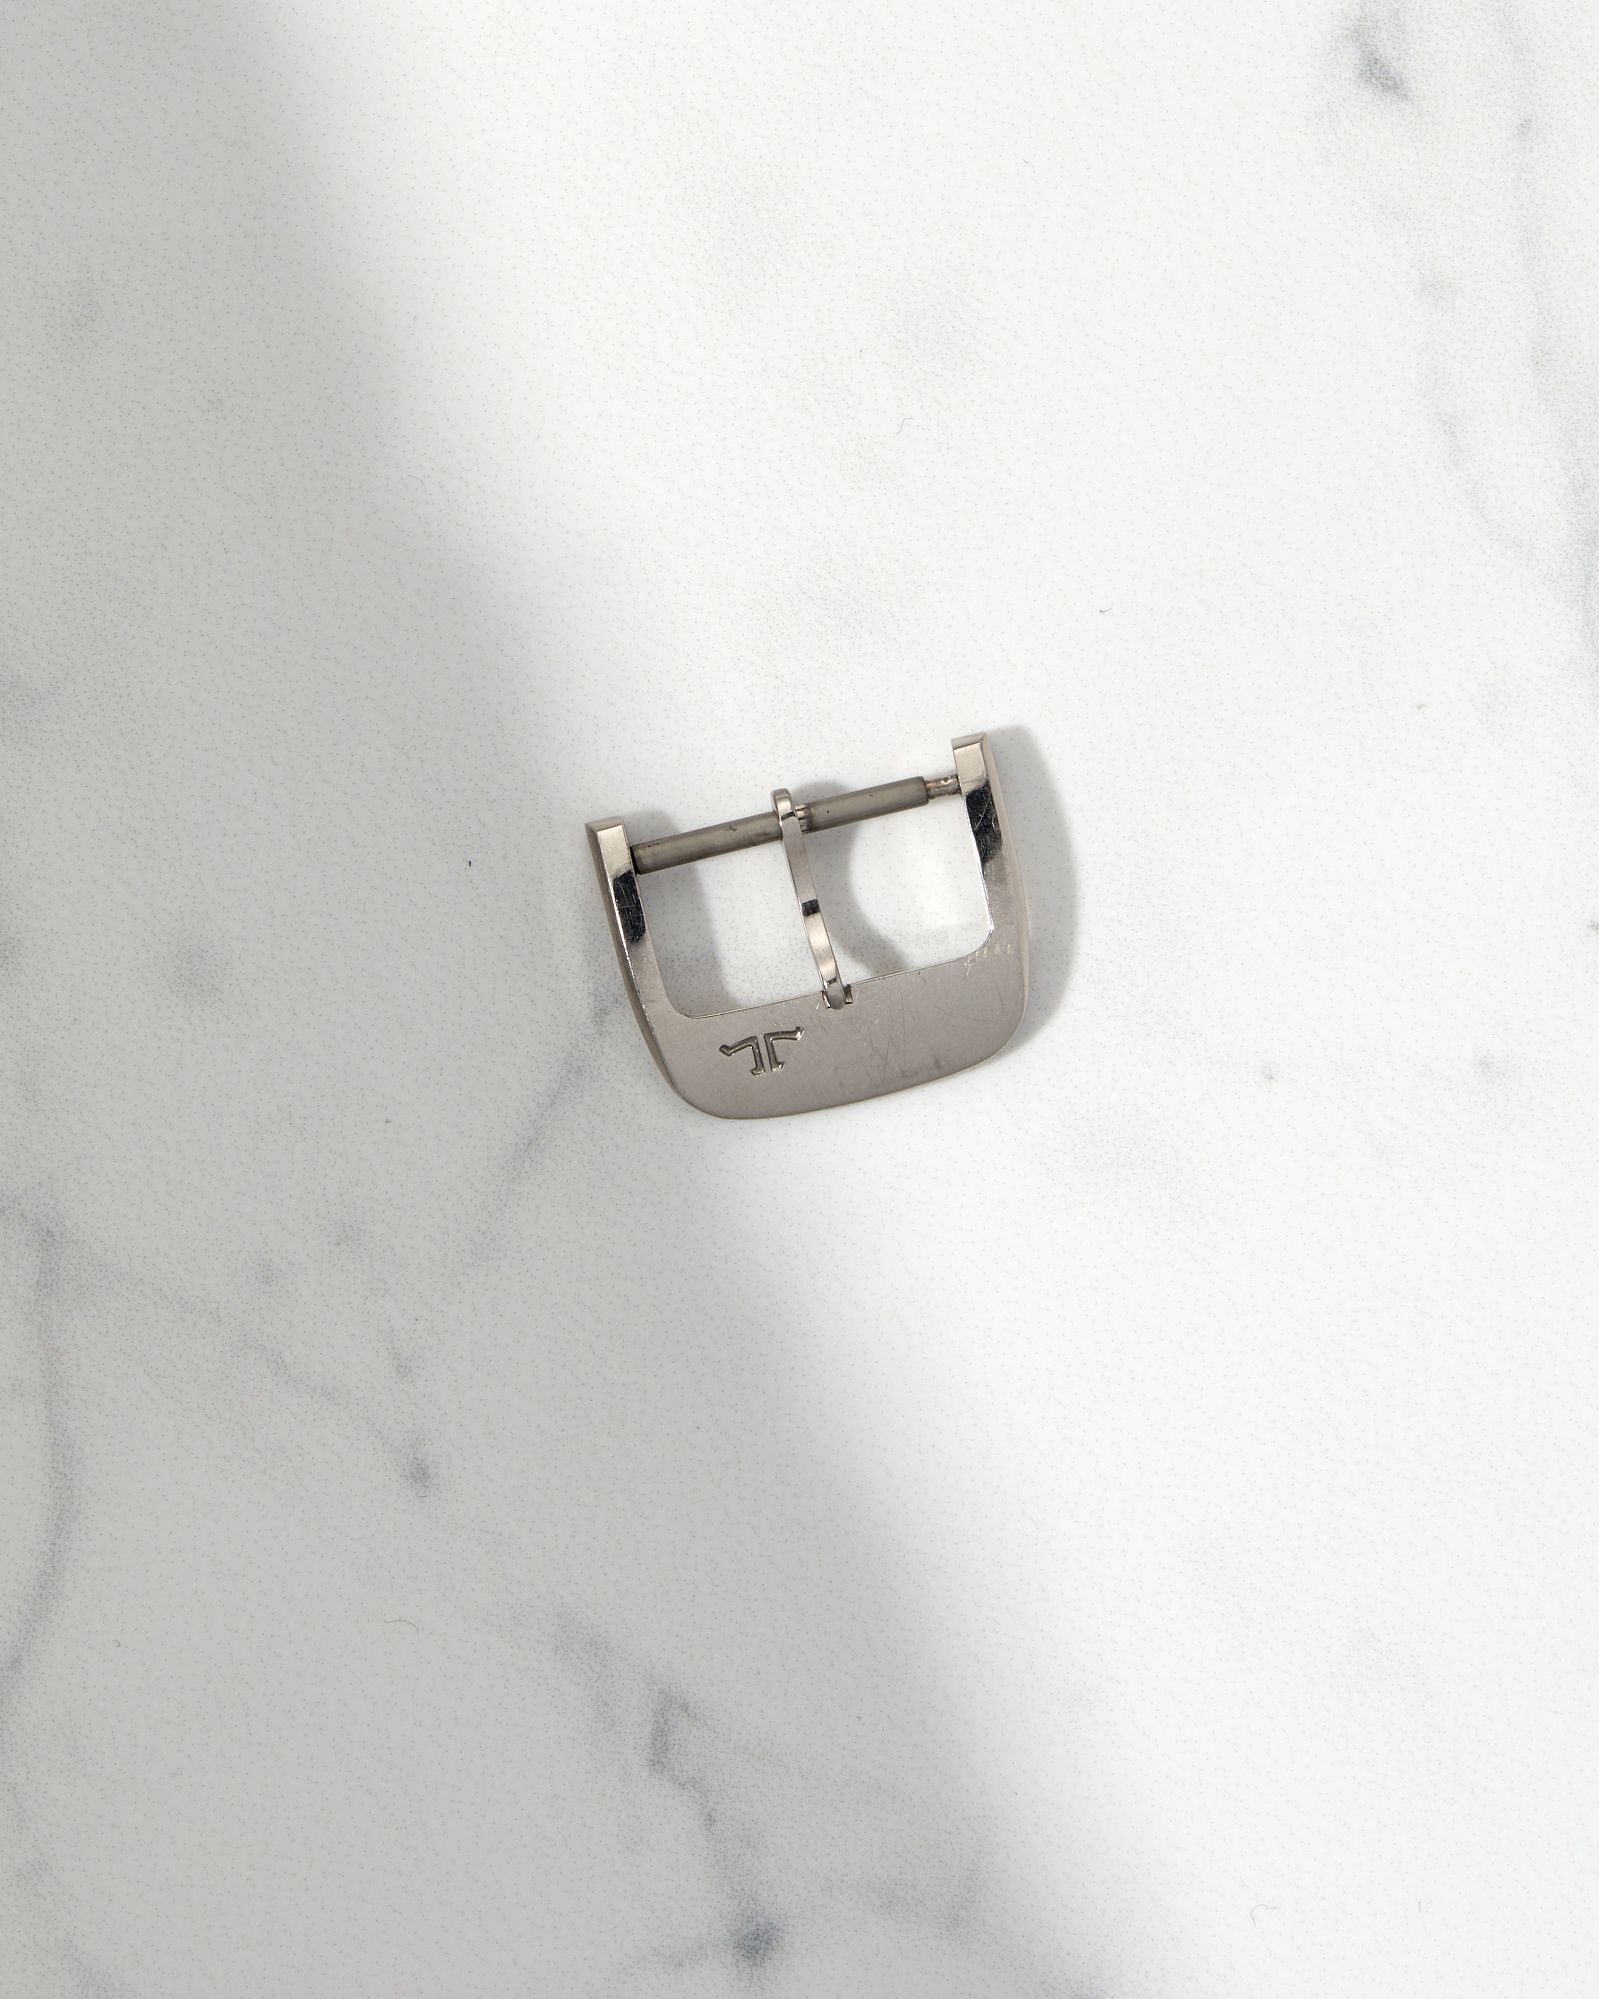 Jaeger LeCoultre White Gold Buckle 16 mm